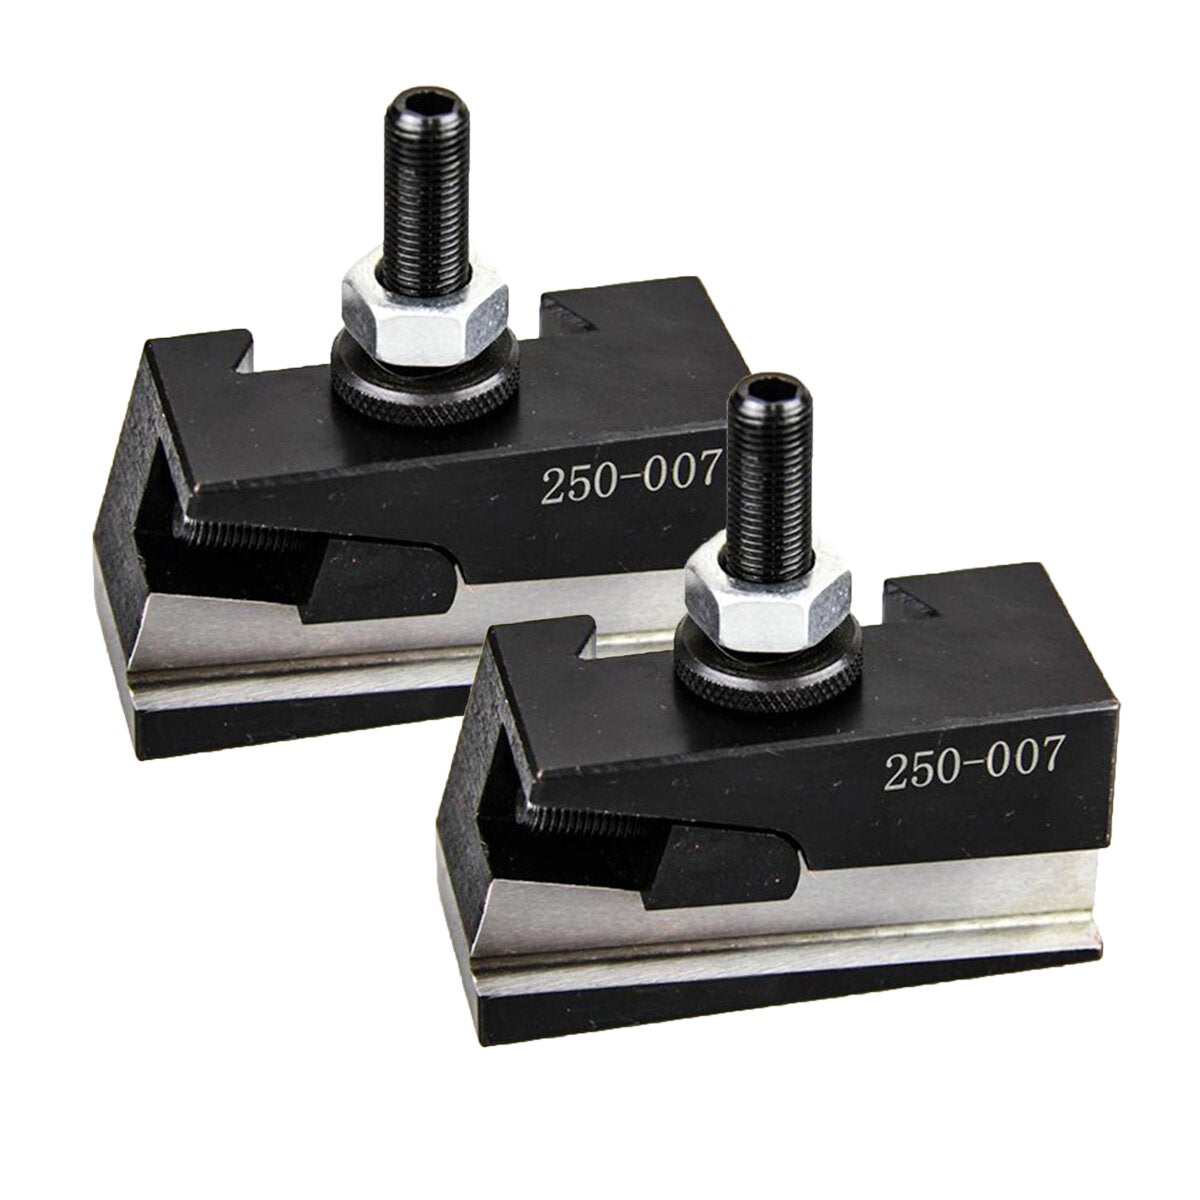 2-Piece Set Of Machifit  Wedge Main Body Tool Holder Exclusively For 250-100/250-111 Tool Holder Body